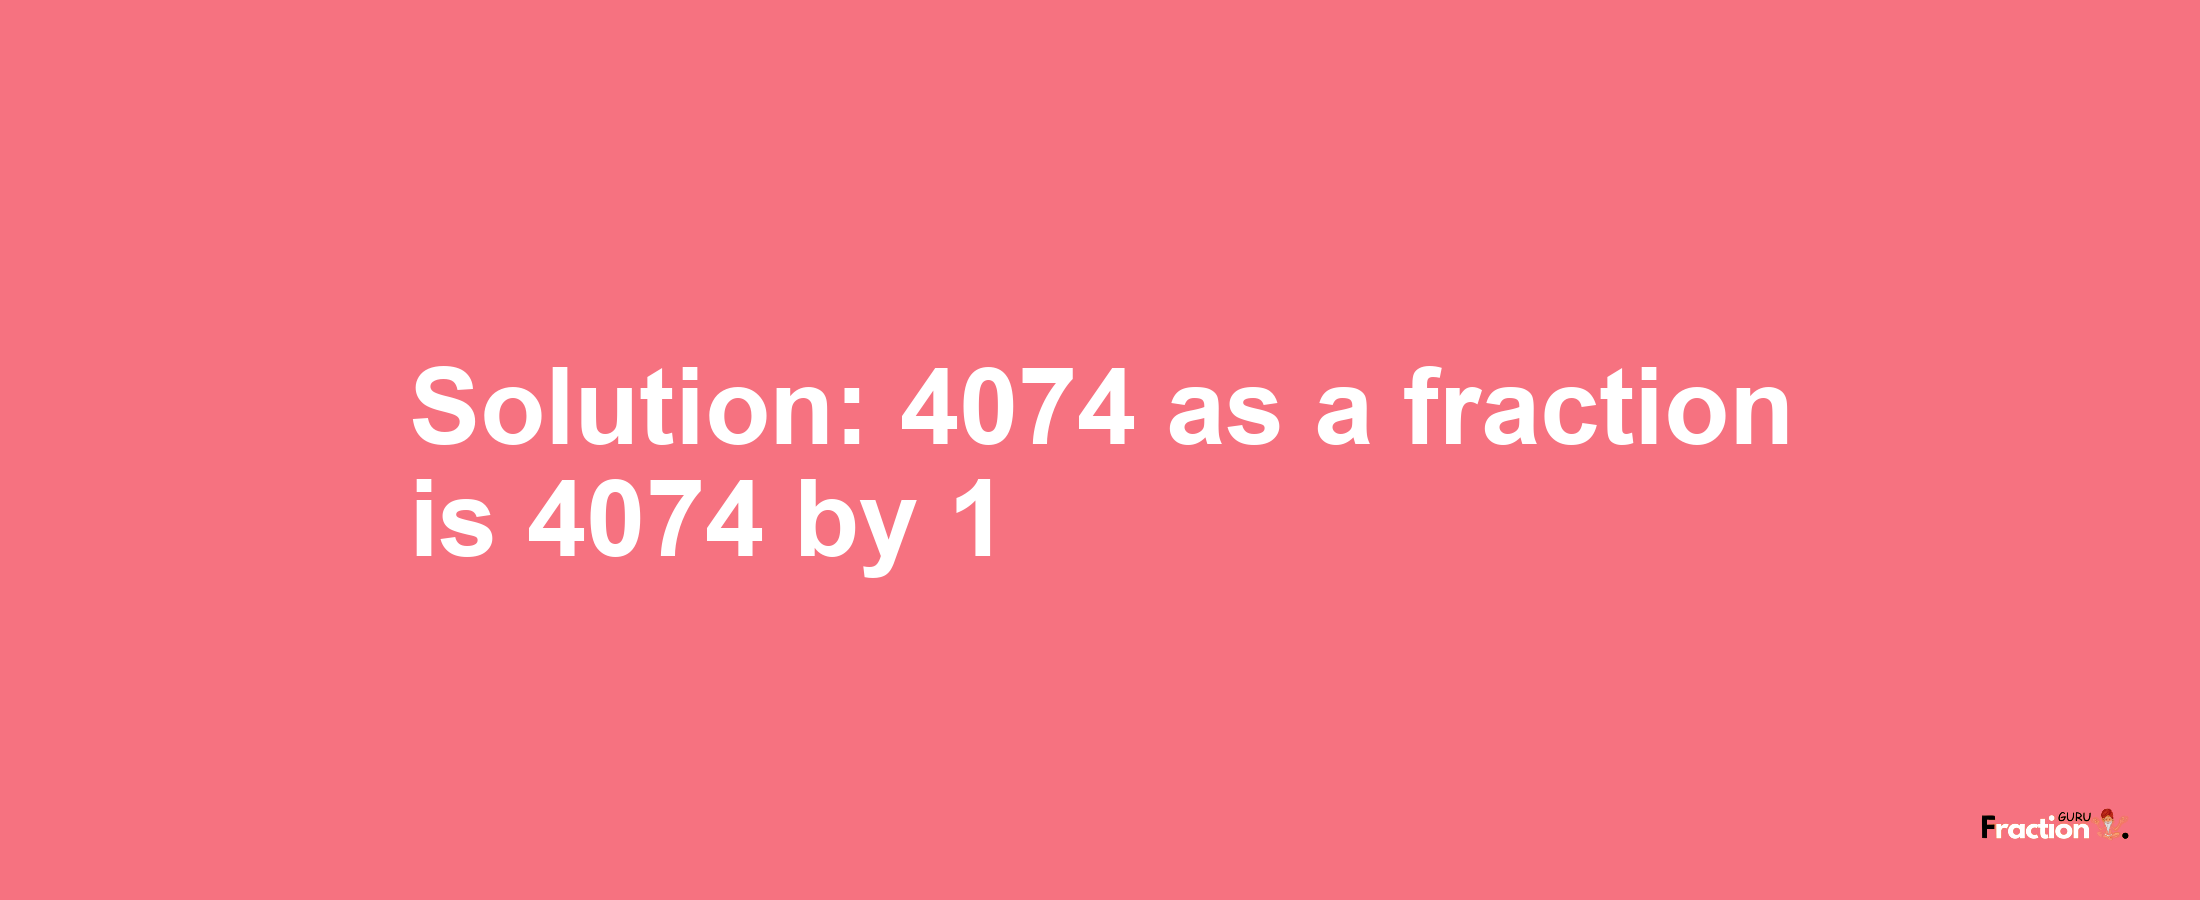 Solution:4074 as a fraction is 4074/1